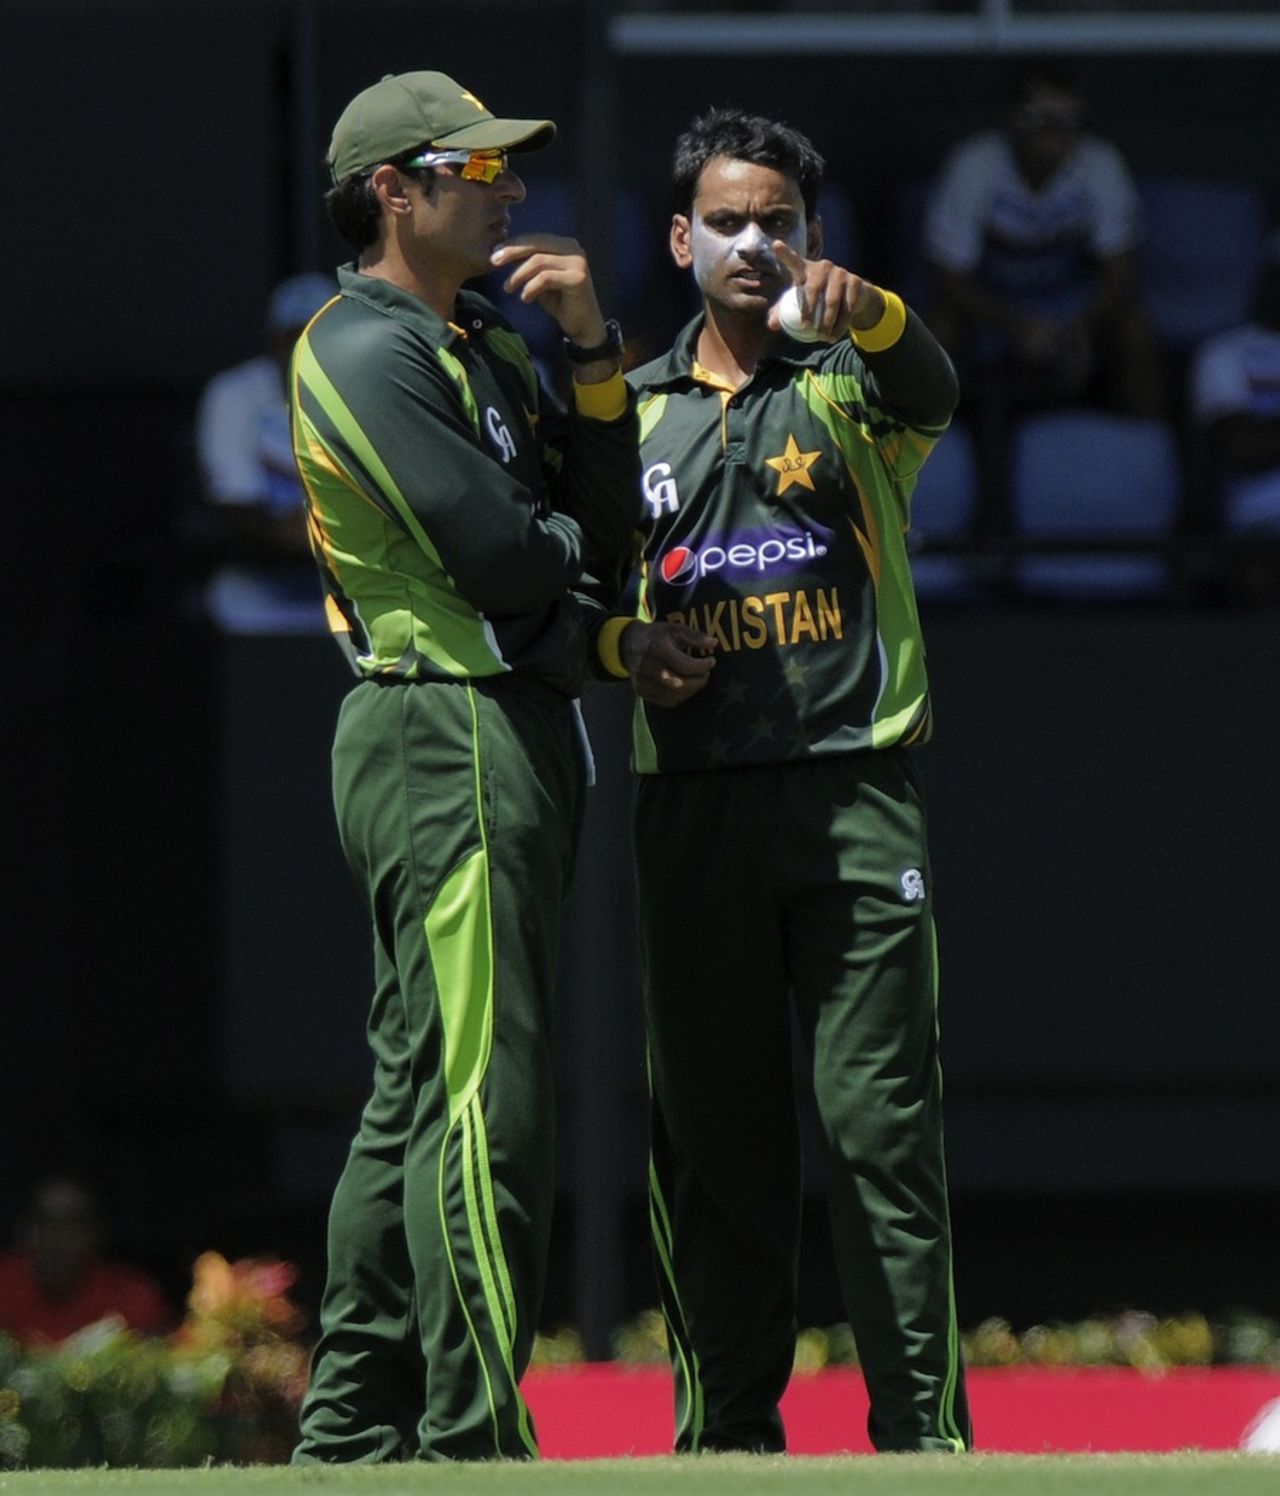 Misbah-ul-Haq and Mohammad Hafeez set the field , West Indies v Pakistan, 4th ODI, St Lucia, July 21, 2013